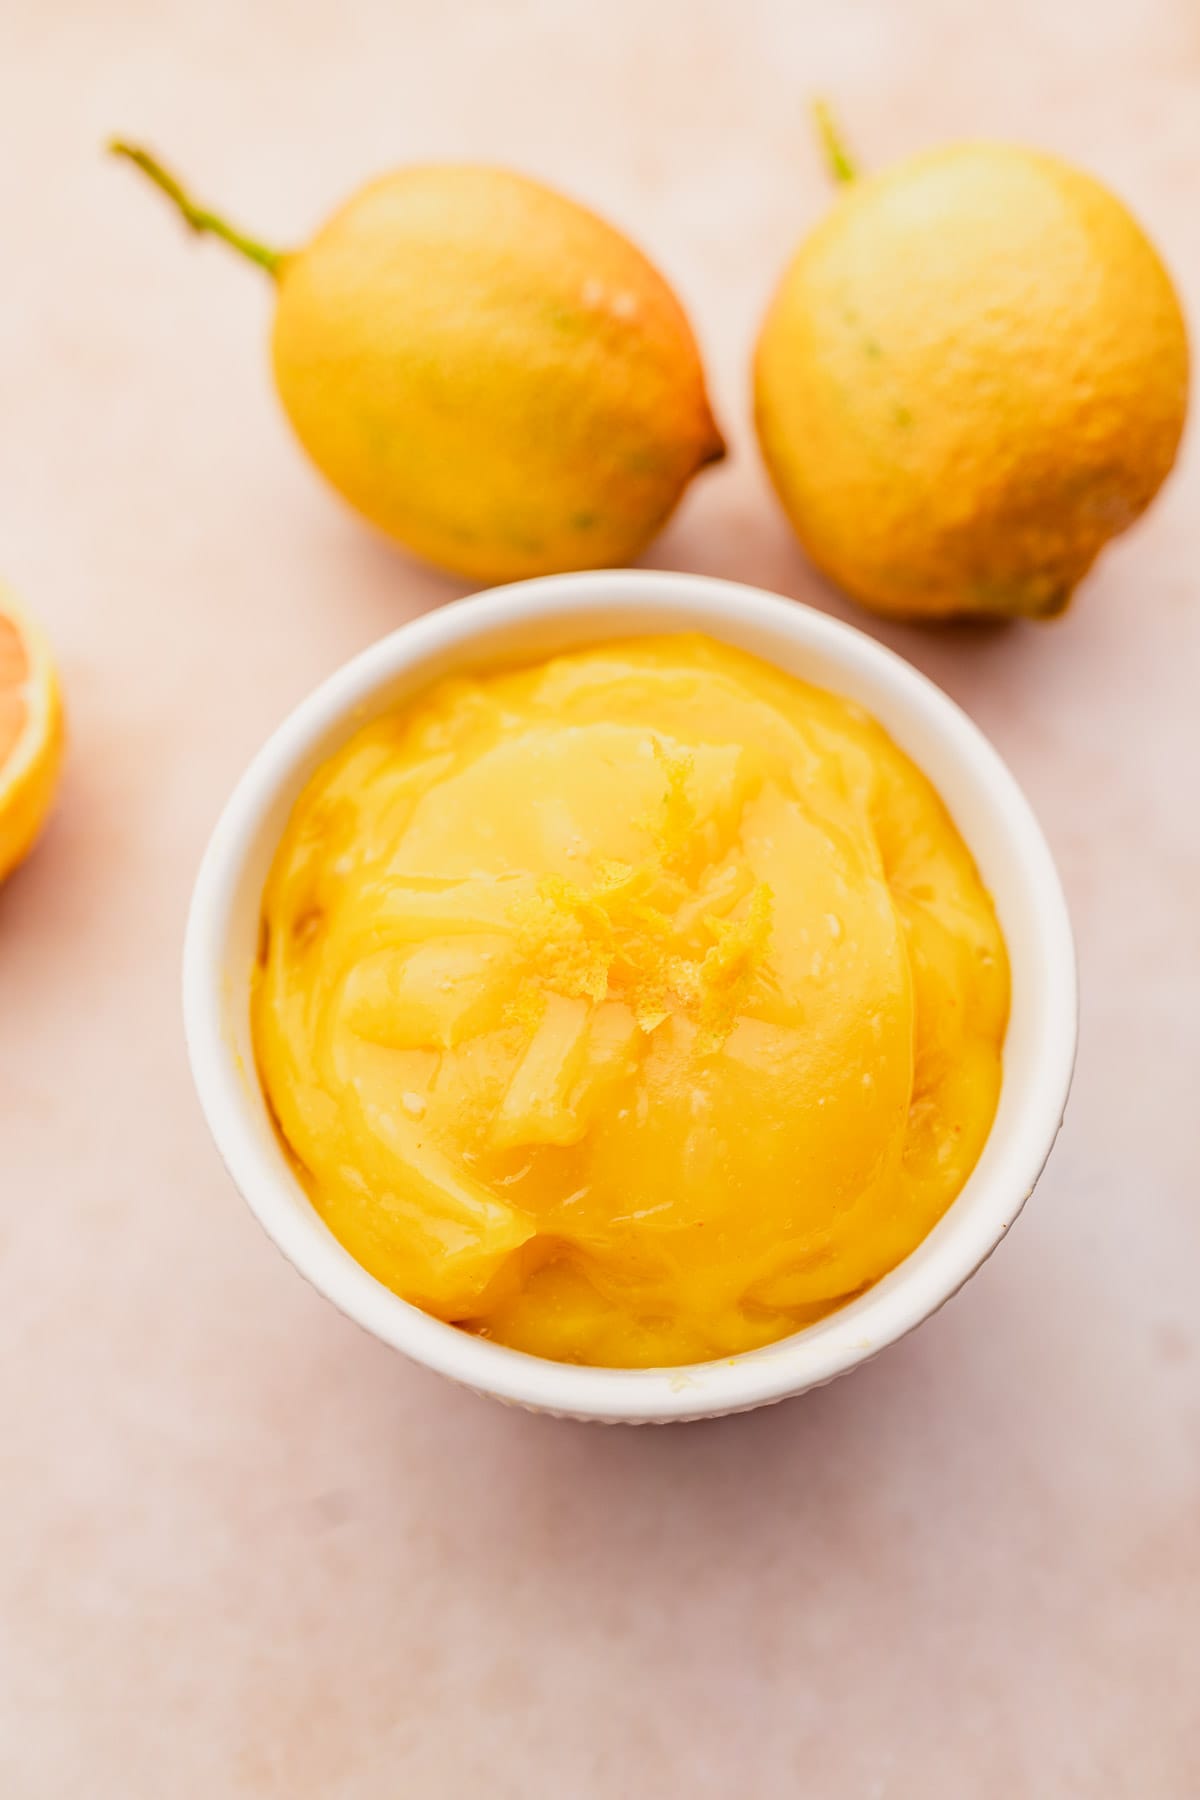 A bowl of vegan lemon curd on a table next to some oranges.